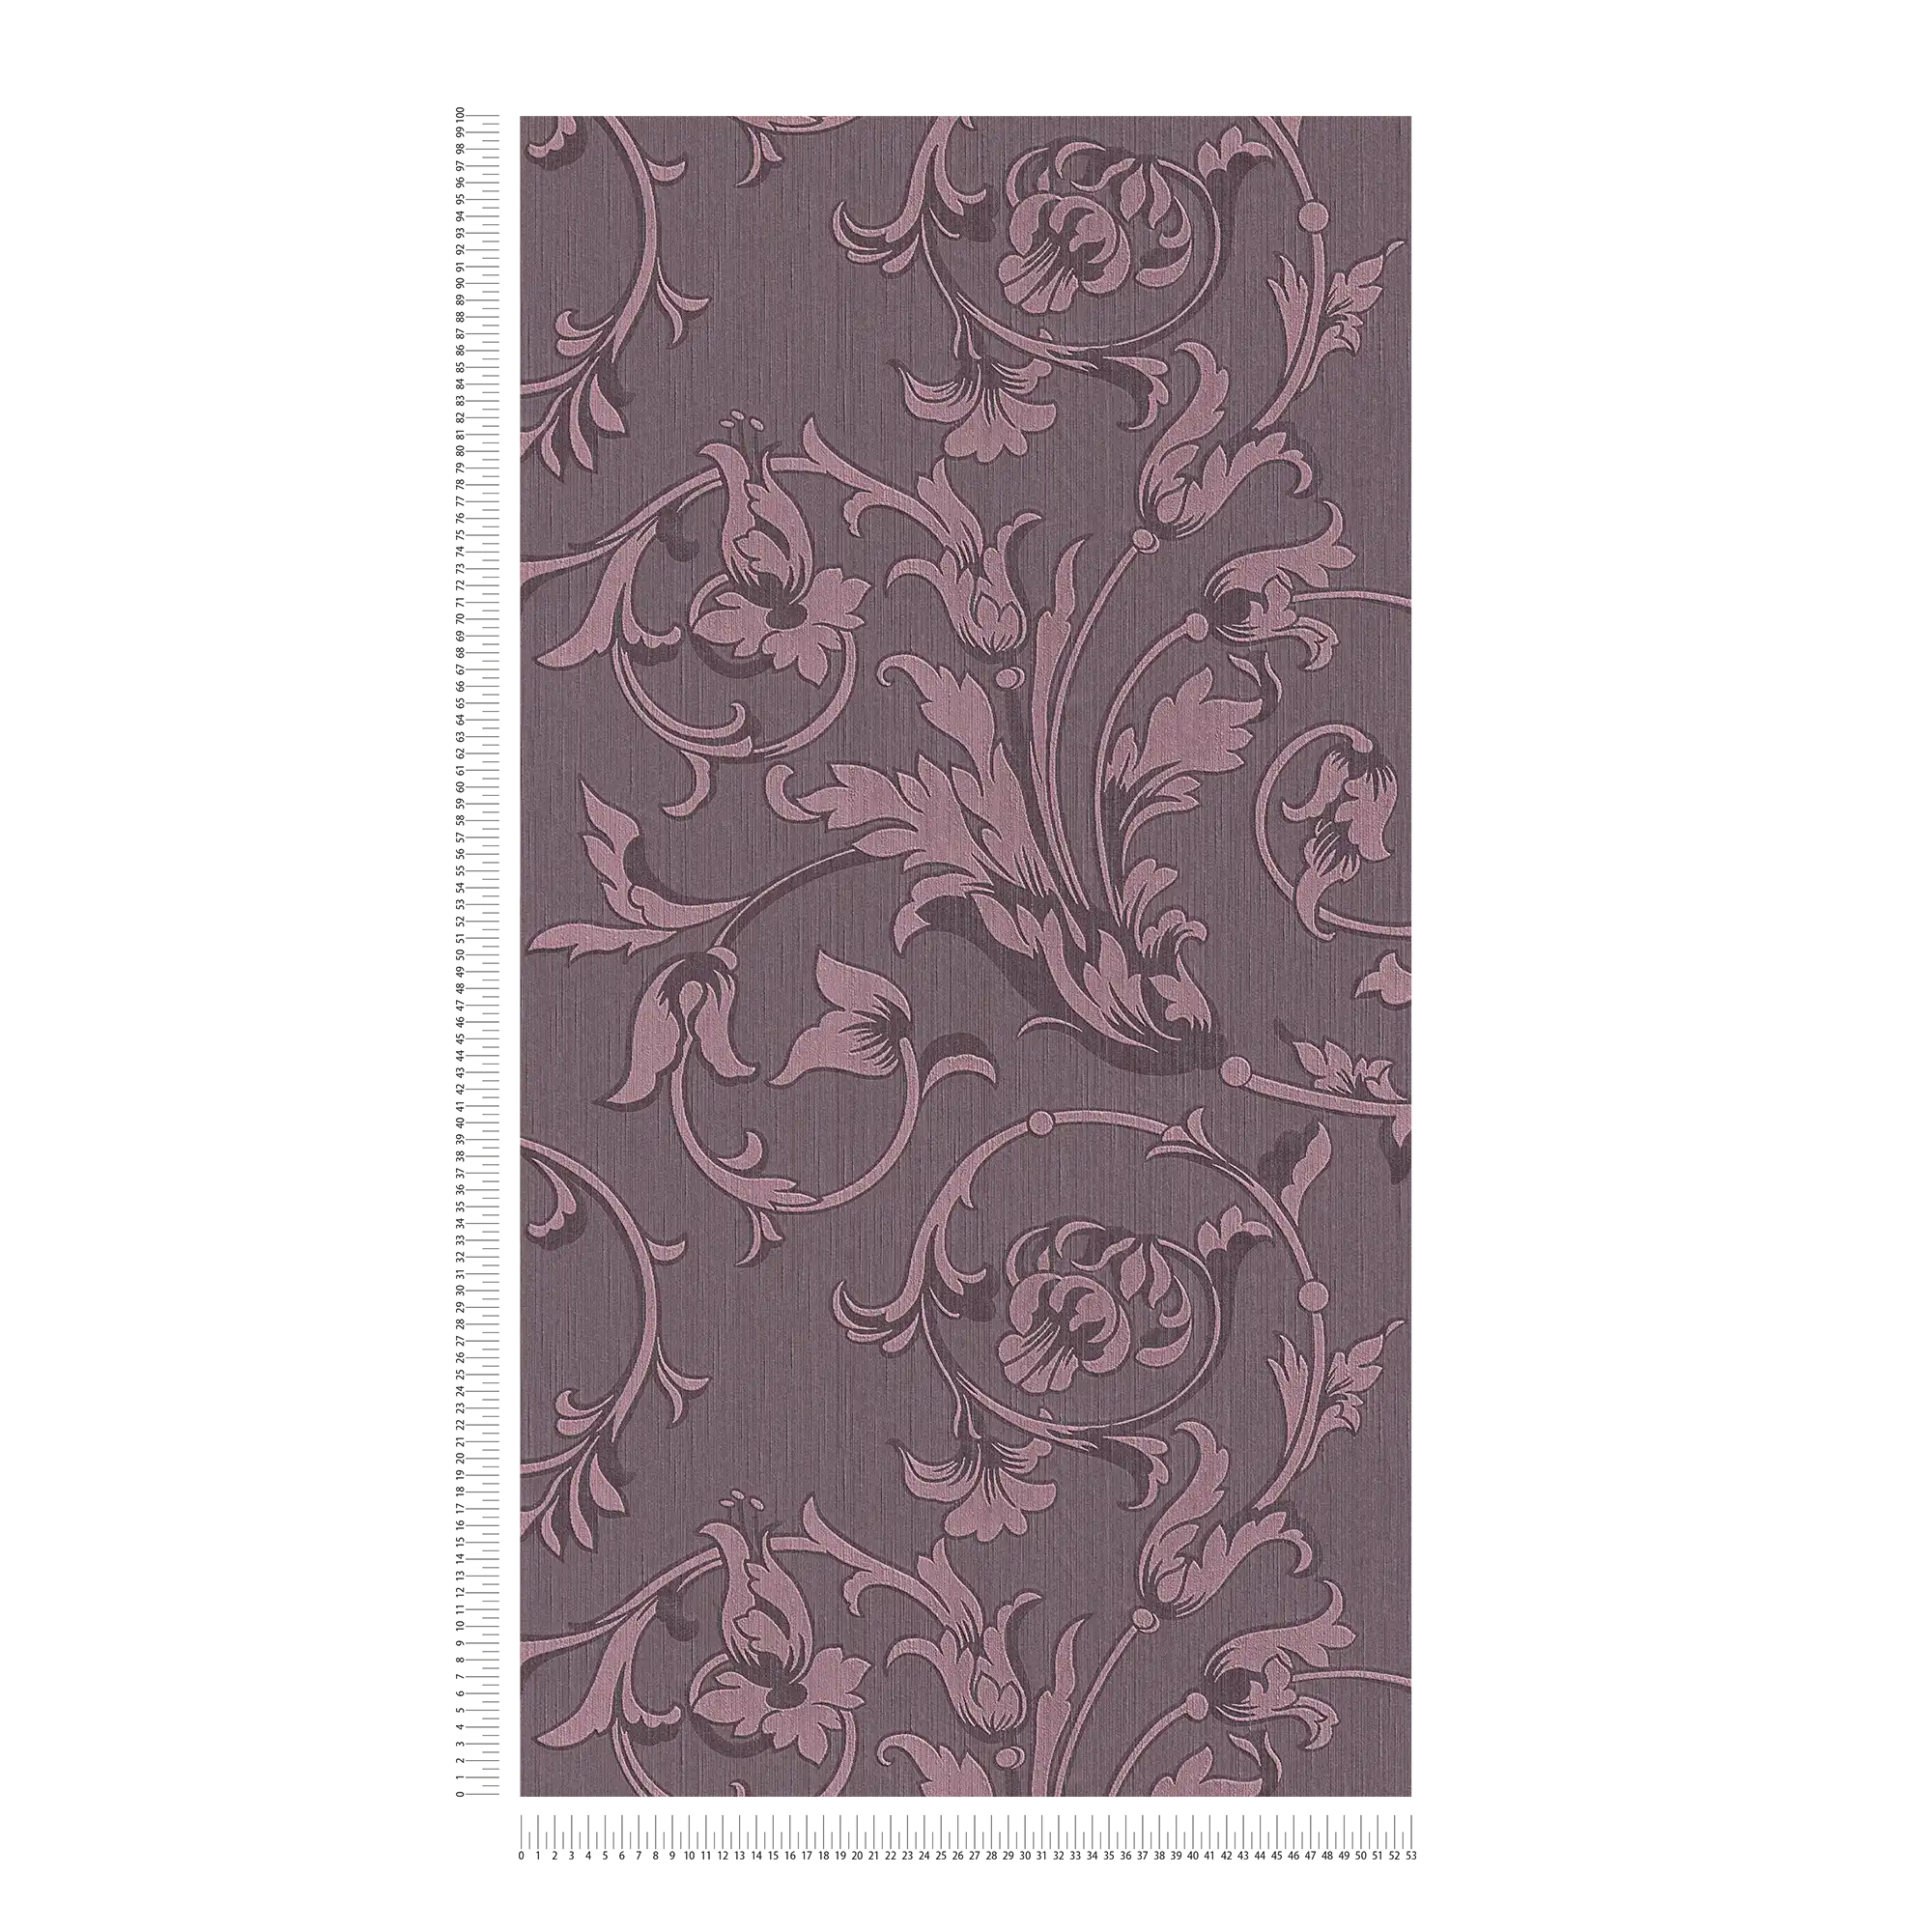             Ornament wallpaper with silk textile look - purple
        